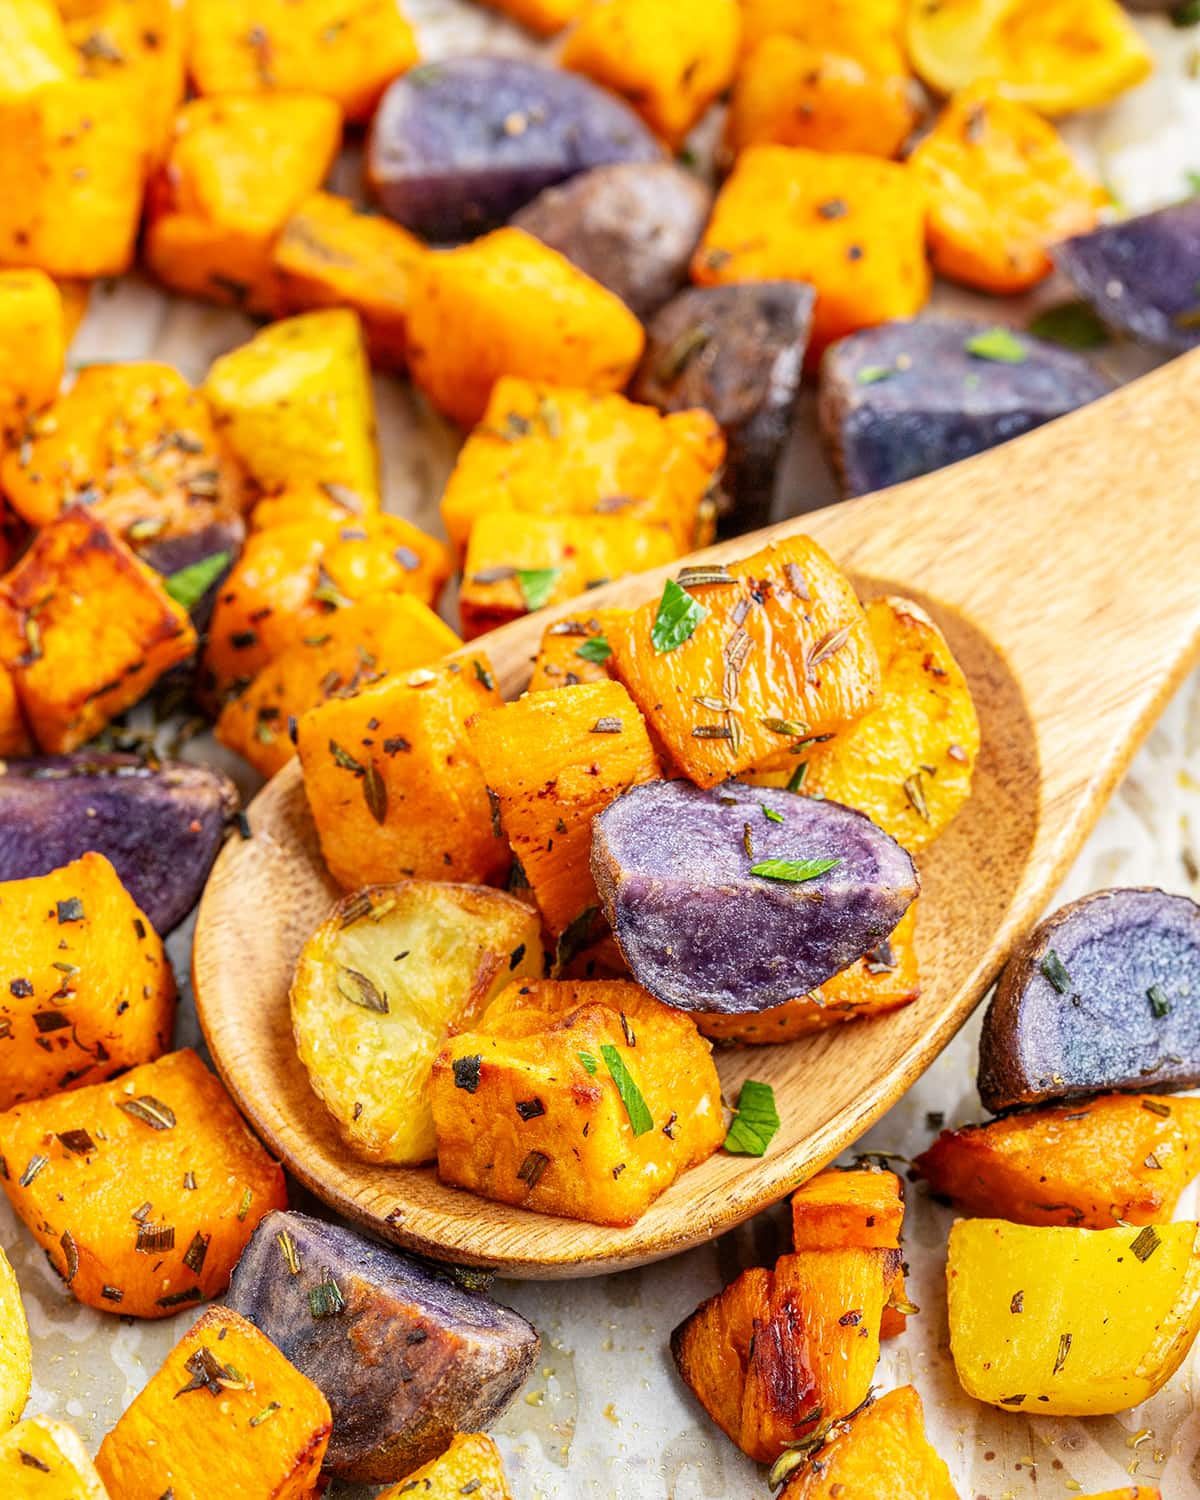 A wooden spoon topped with roasted sweet potatoes, purple potatoes, and golden potatoes.